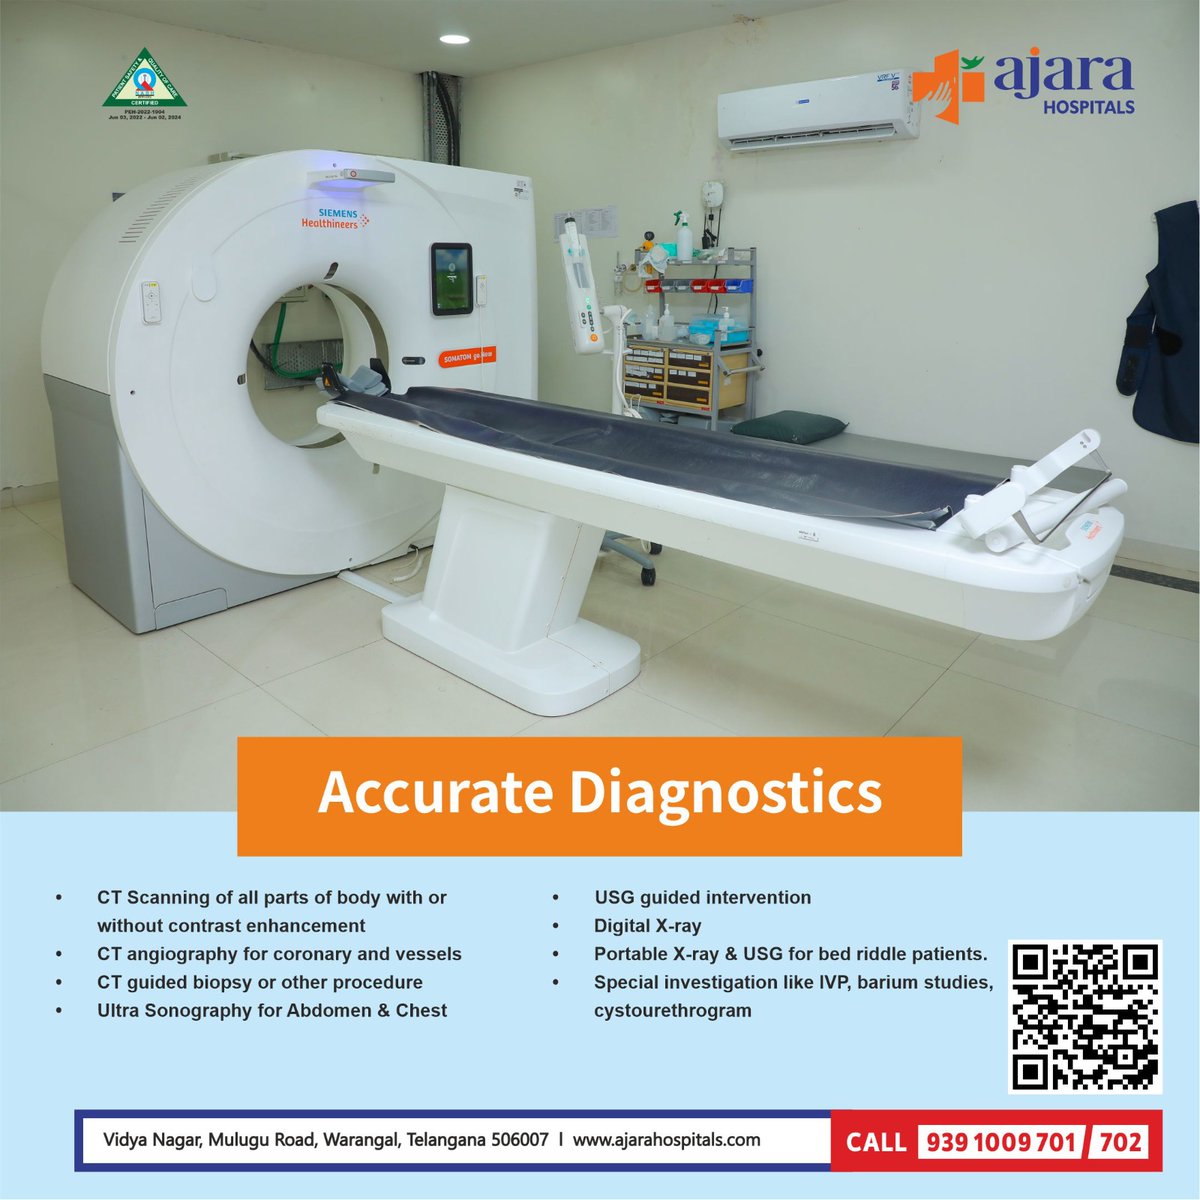 Experience precise diagnostics at Ajara Hospital📷, ensuring accurate and timely treatment. 
No.1 multi specialty hospital in Warangal
24*7 injury and emergency services
#AccurateDiagnostics #PrecisionMedicine #DiagnosticAccuracy #ClinicalDiagnosis
#LabTesting #AjaraHospital